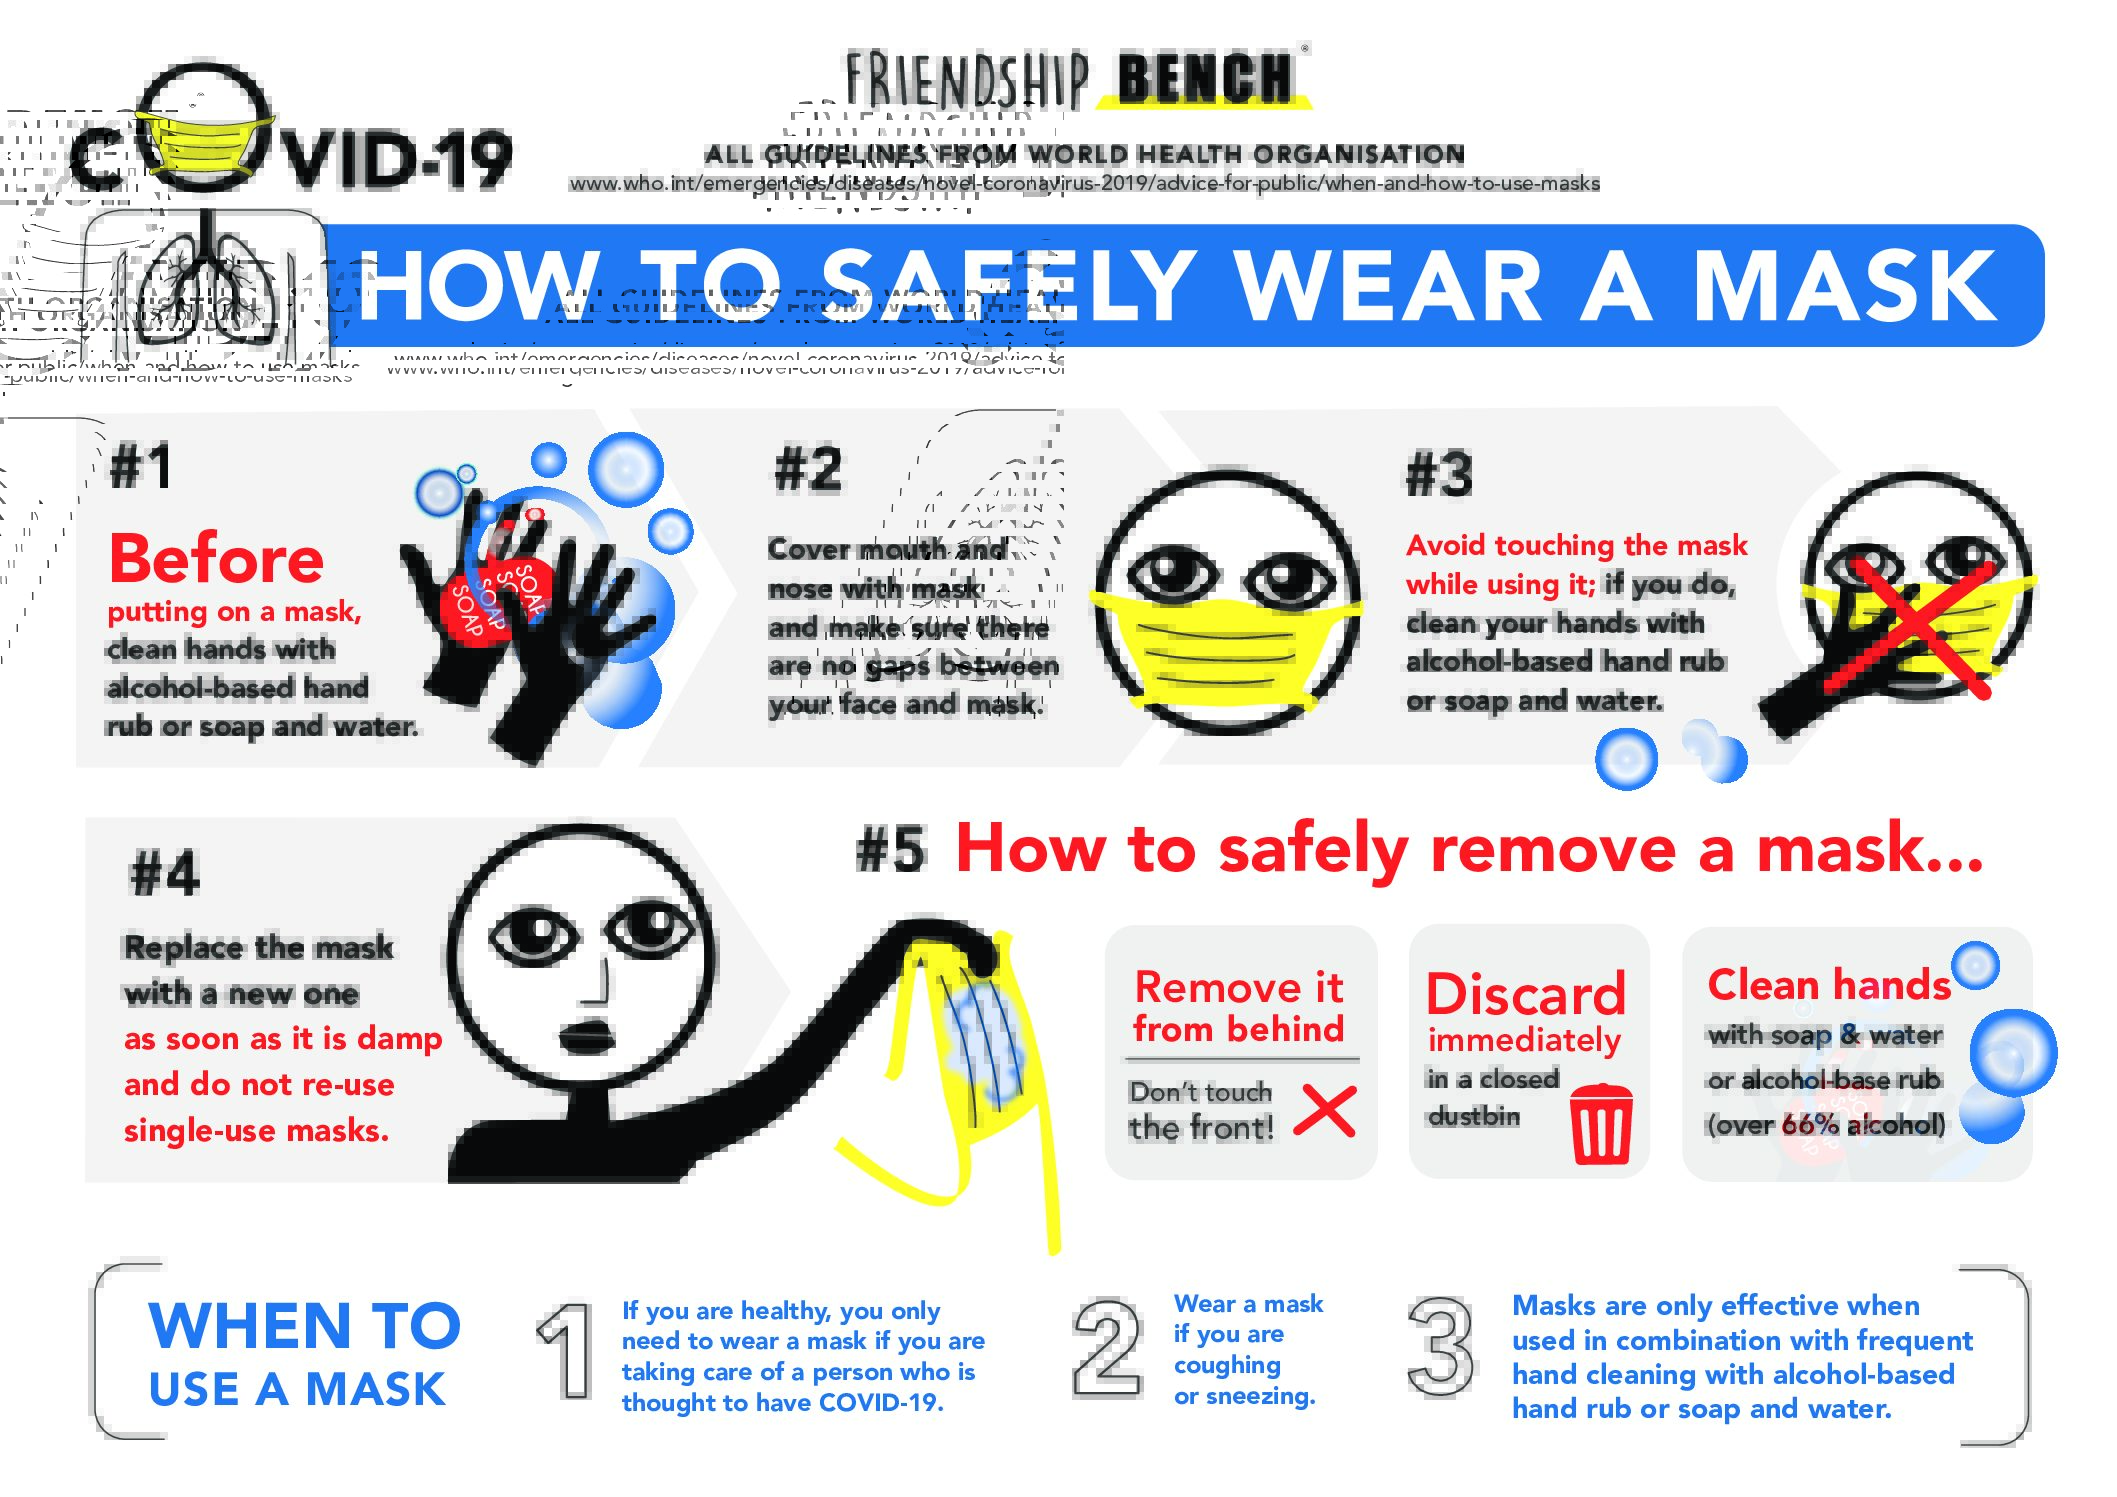 Infographic- How to use mask